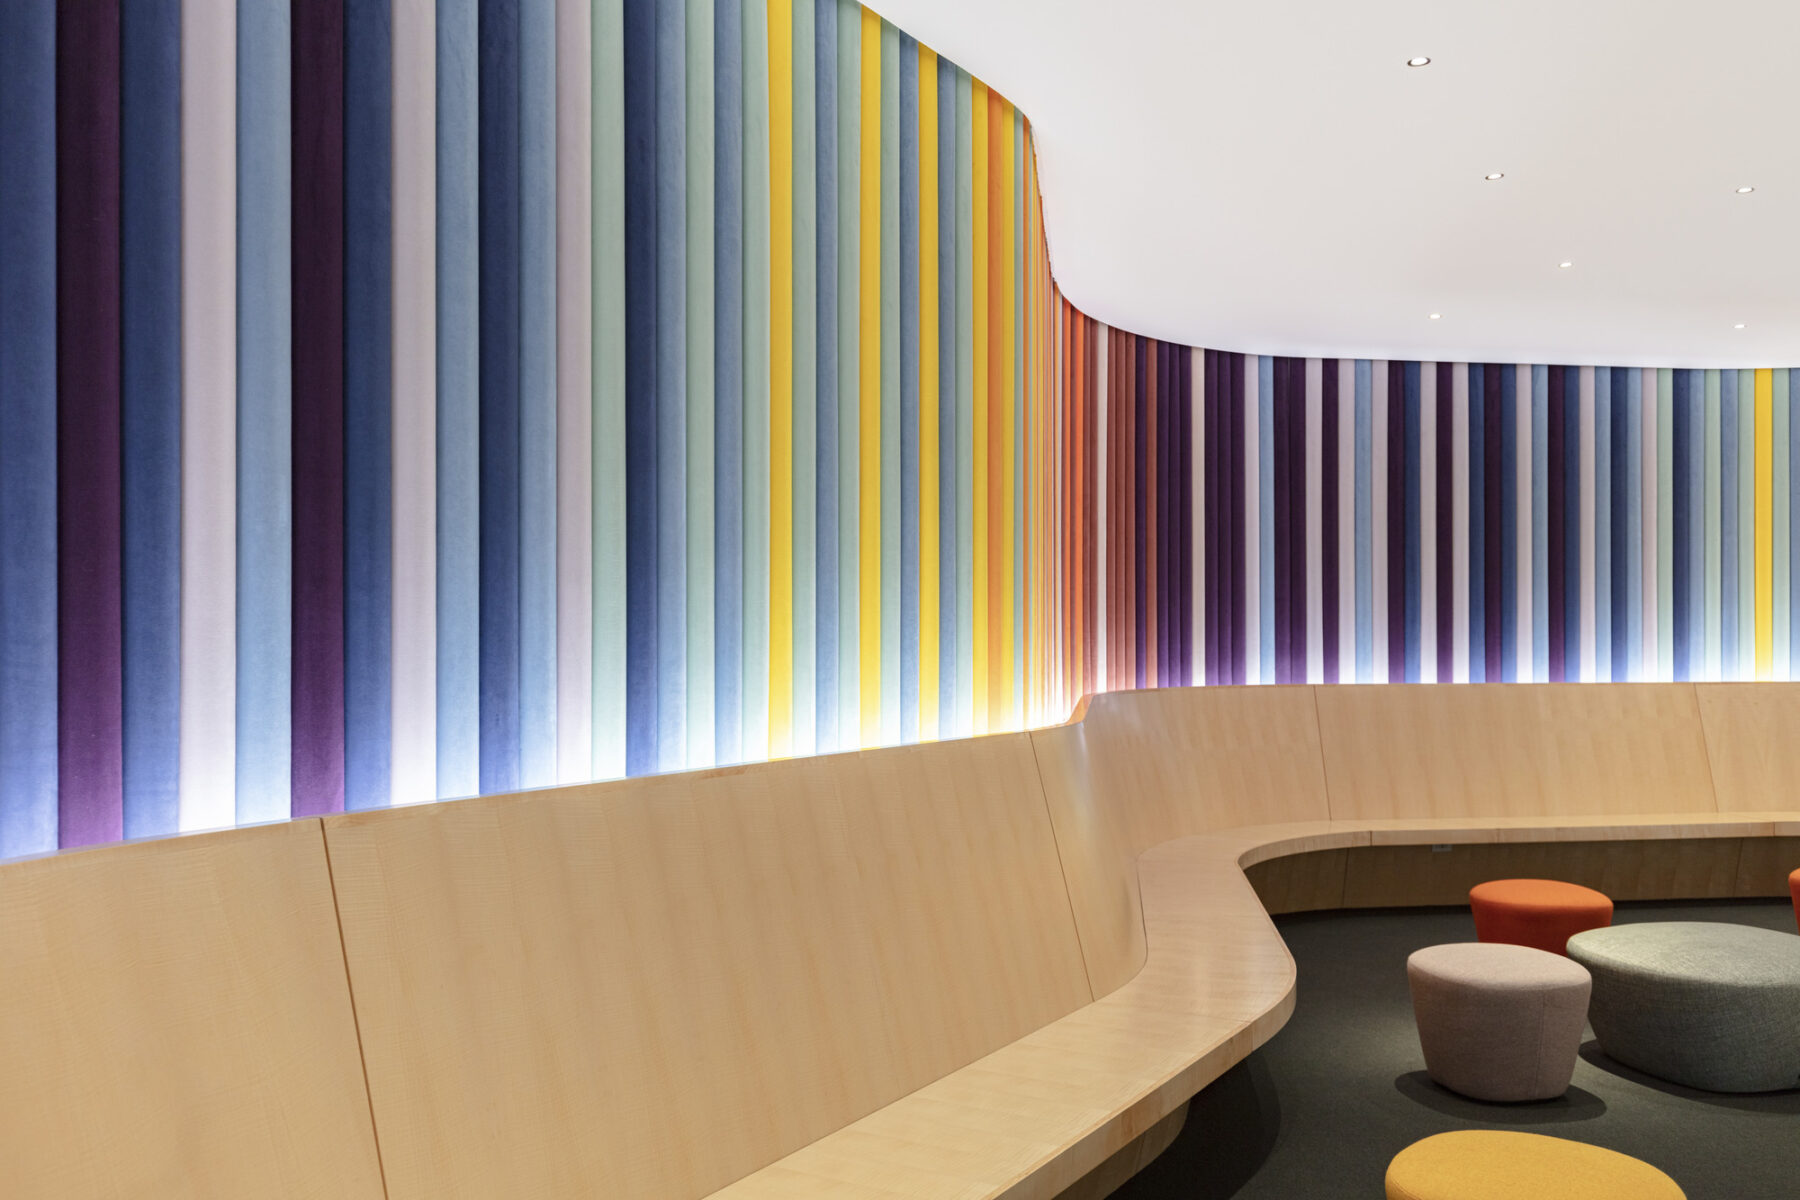 Lobby space with wrap around built-in bench and colorfully upholstered wall